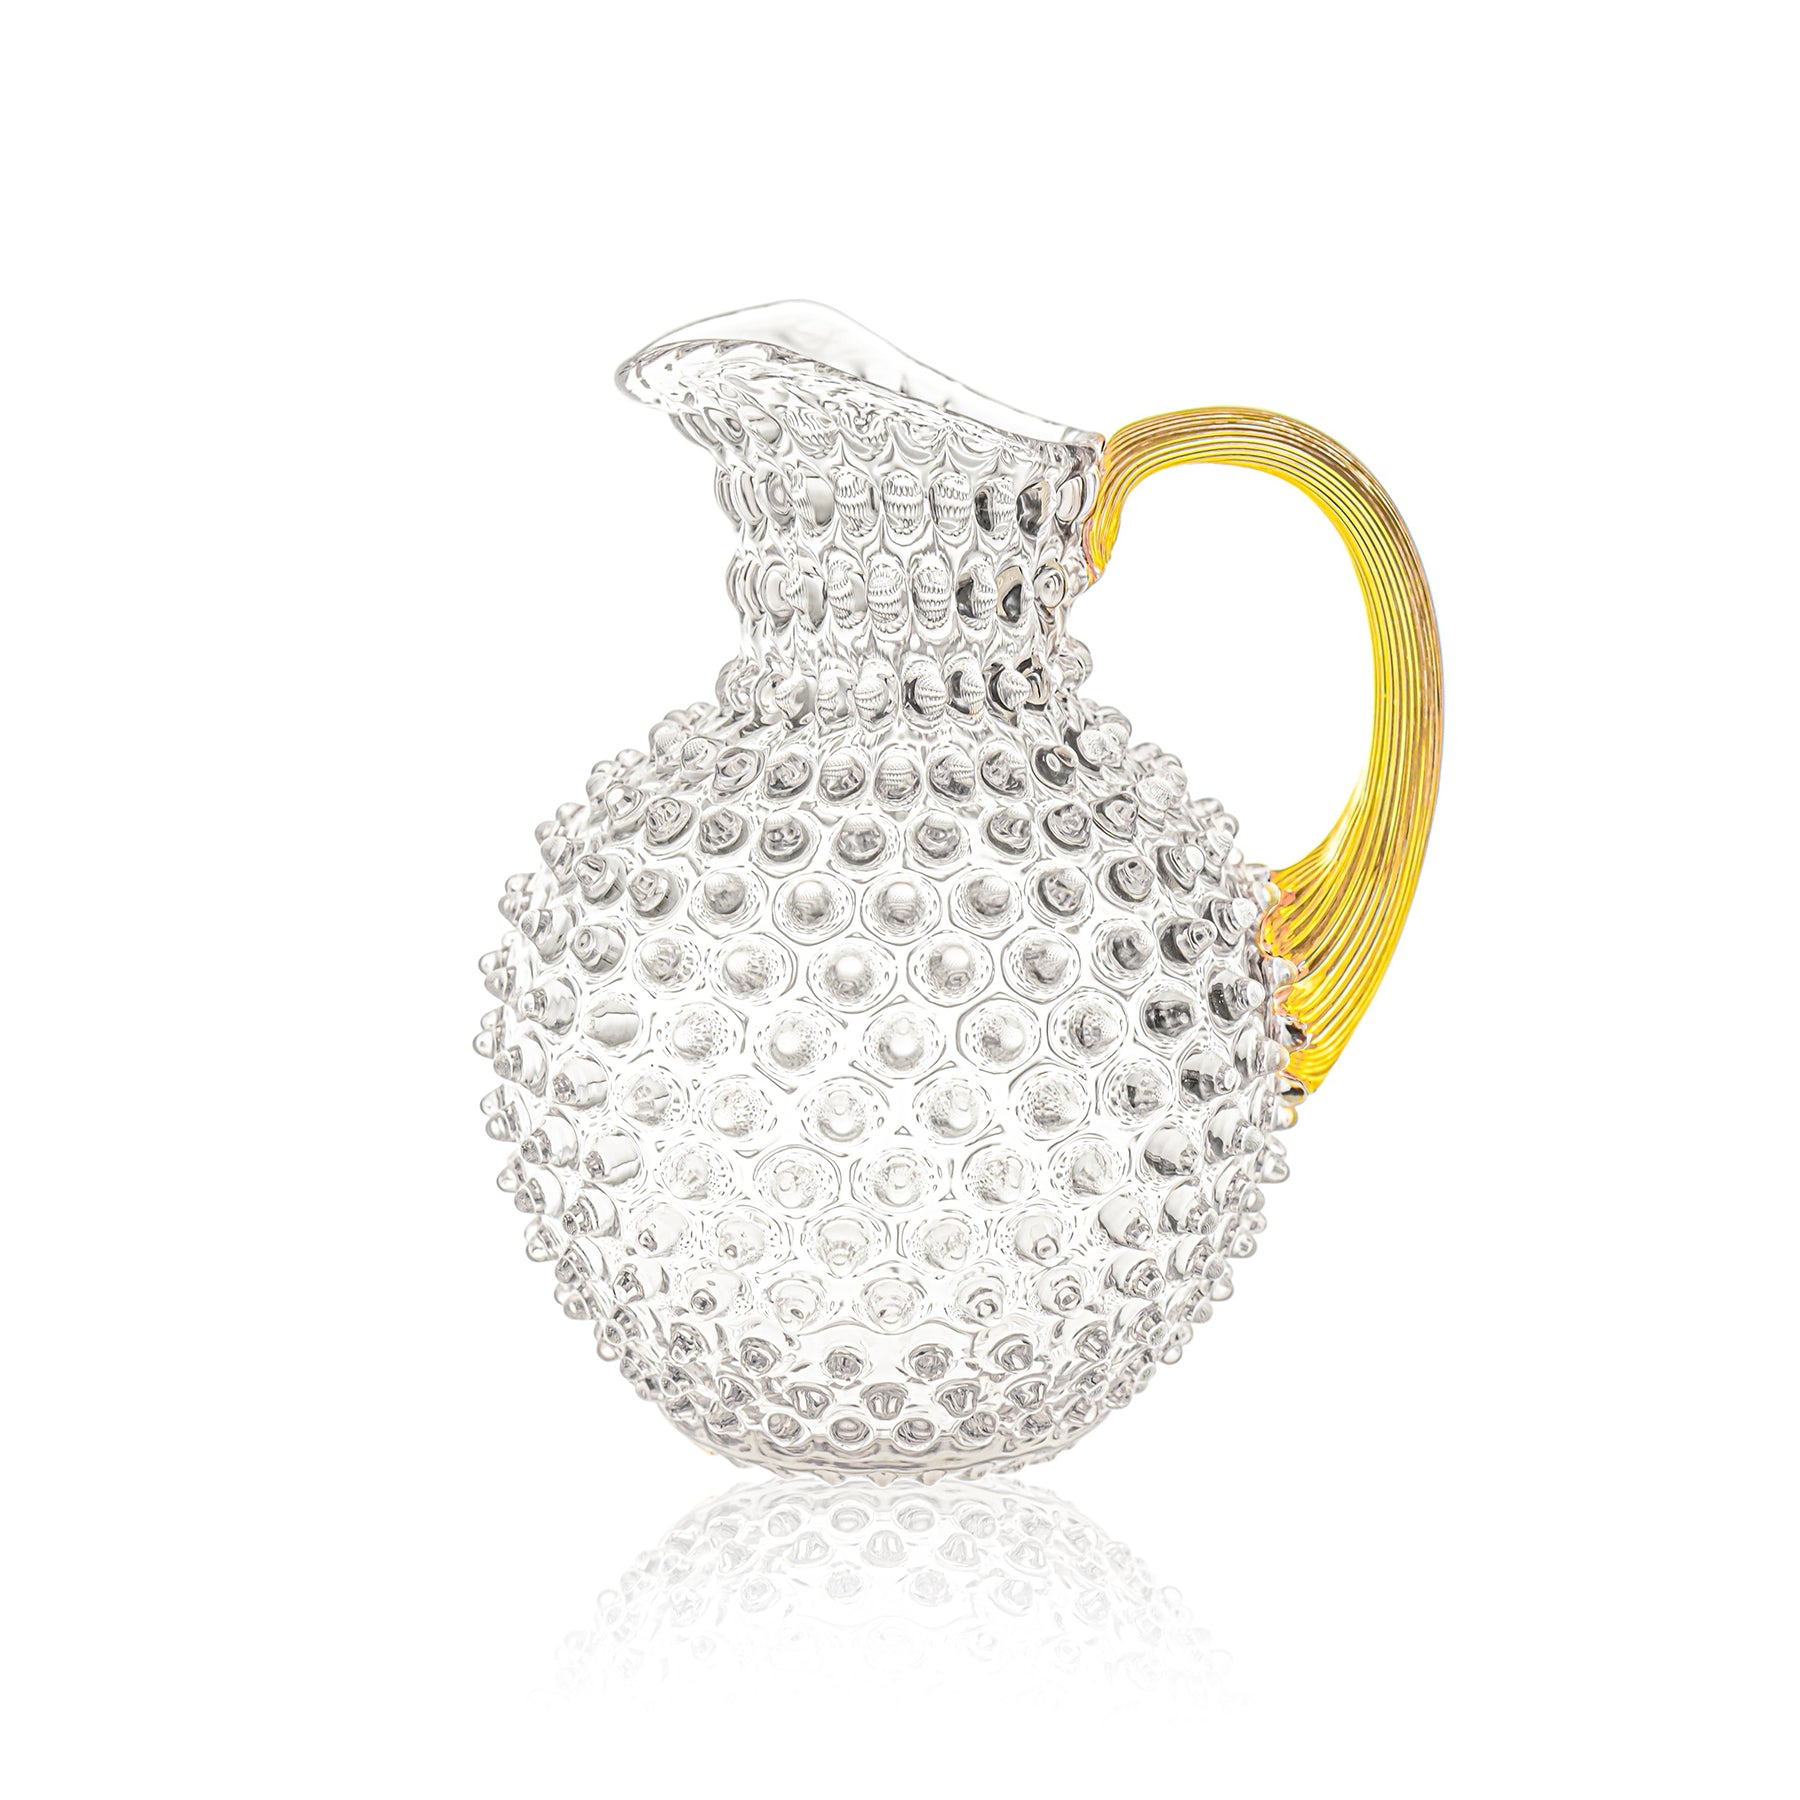 Crystal hobnail jug | clear with gold handle